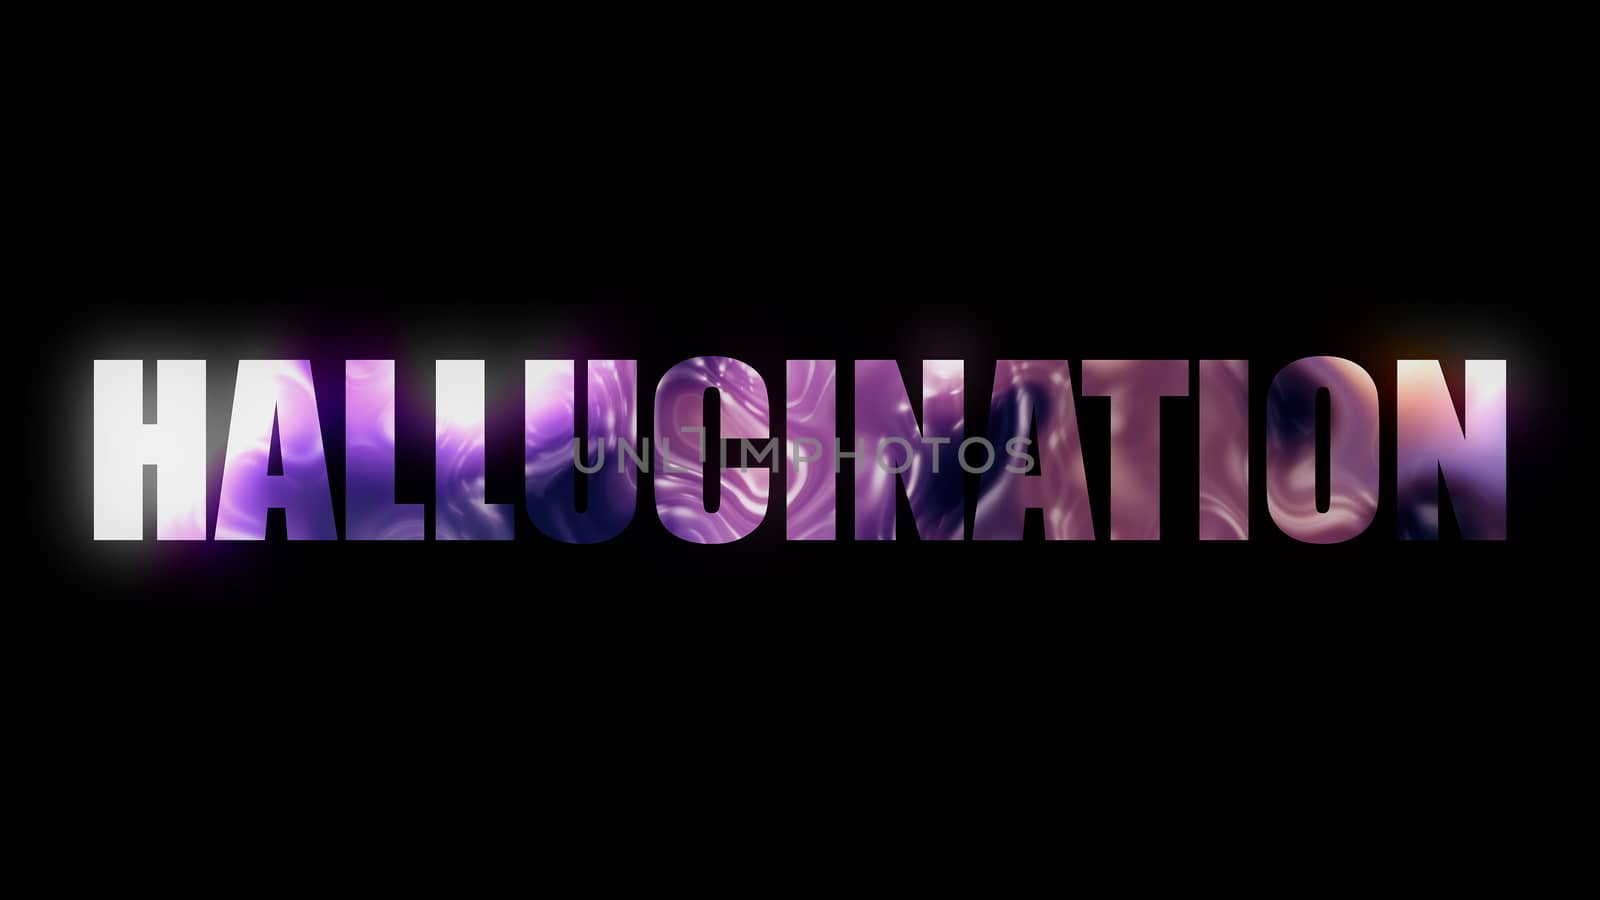 Word Hallucination of letters with a plasma effect, 3d rendering background, computer generated by nolimit046